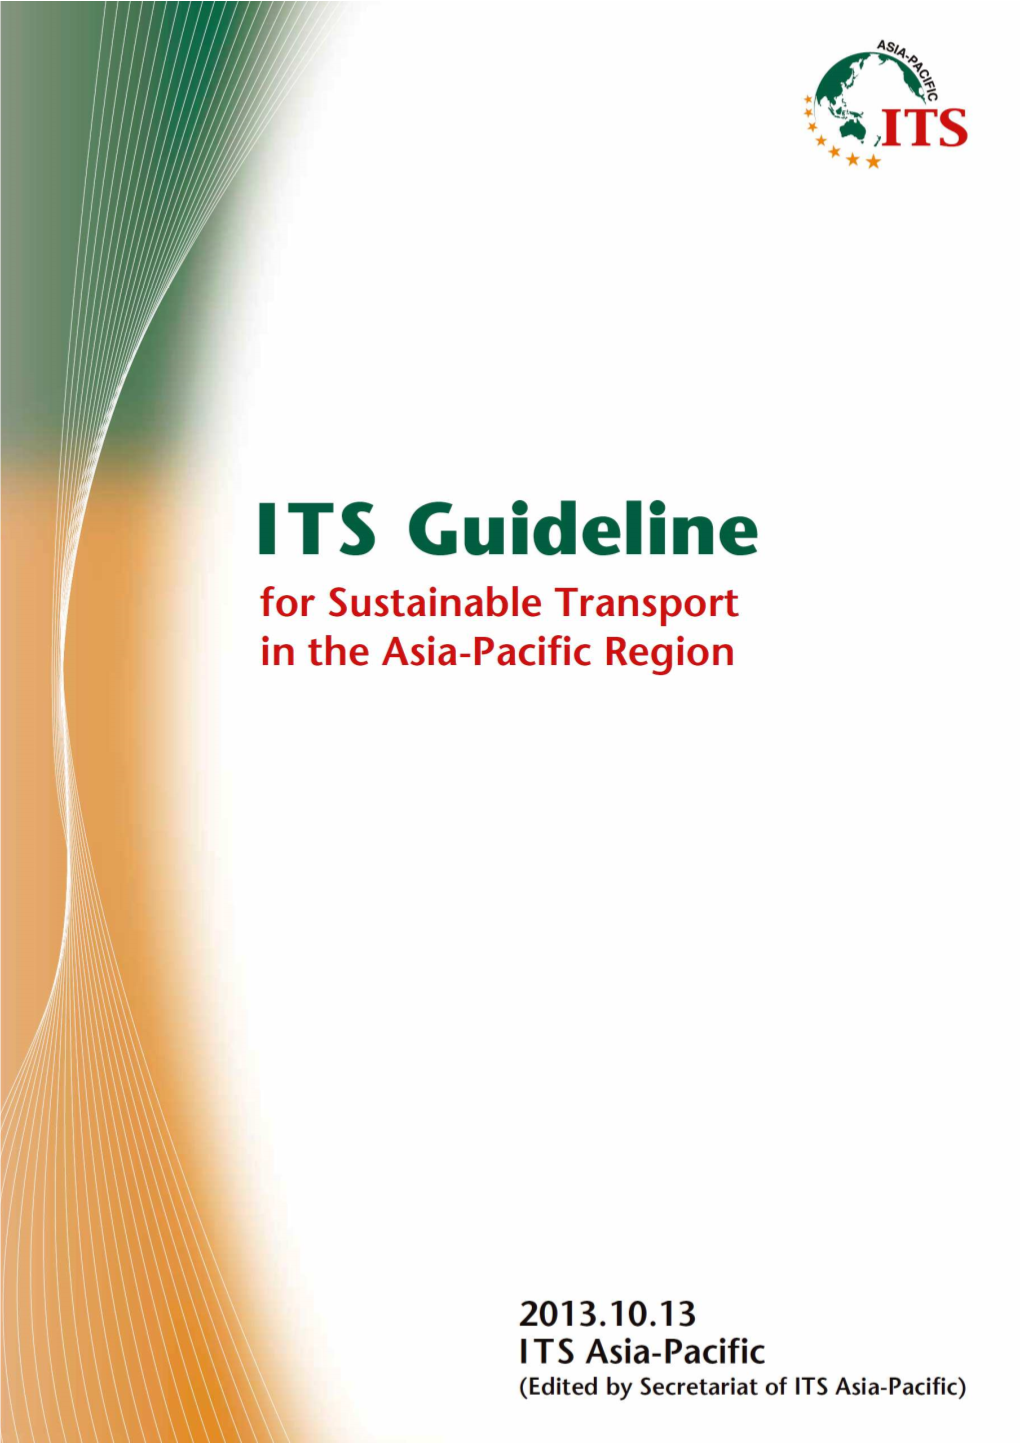 ITS Guideline for Sustainable Transport in the Asia-Pacific Region